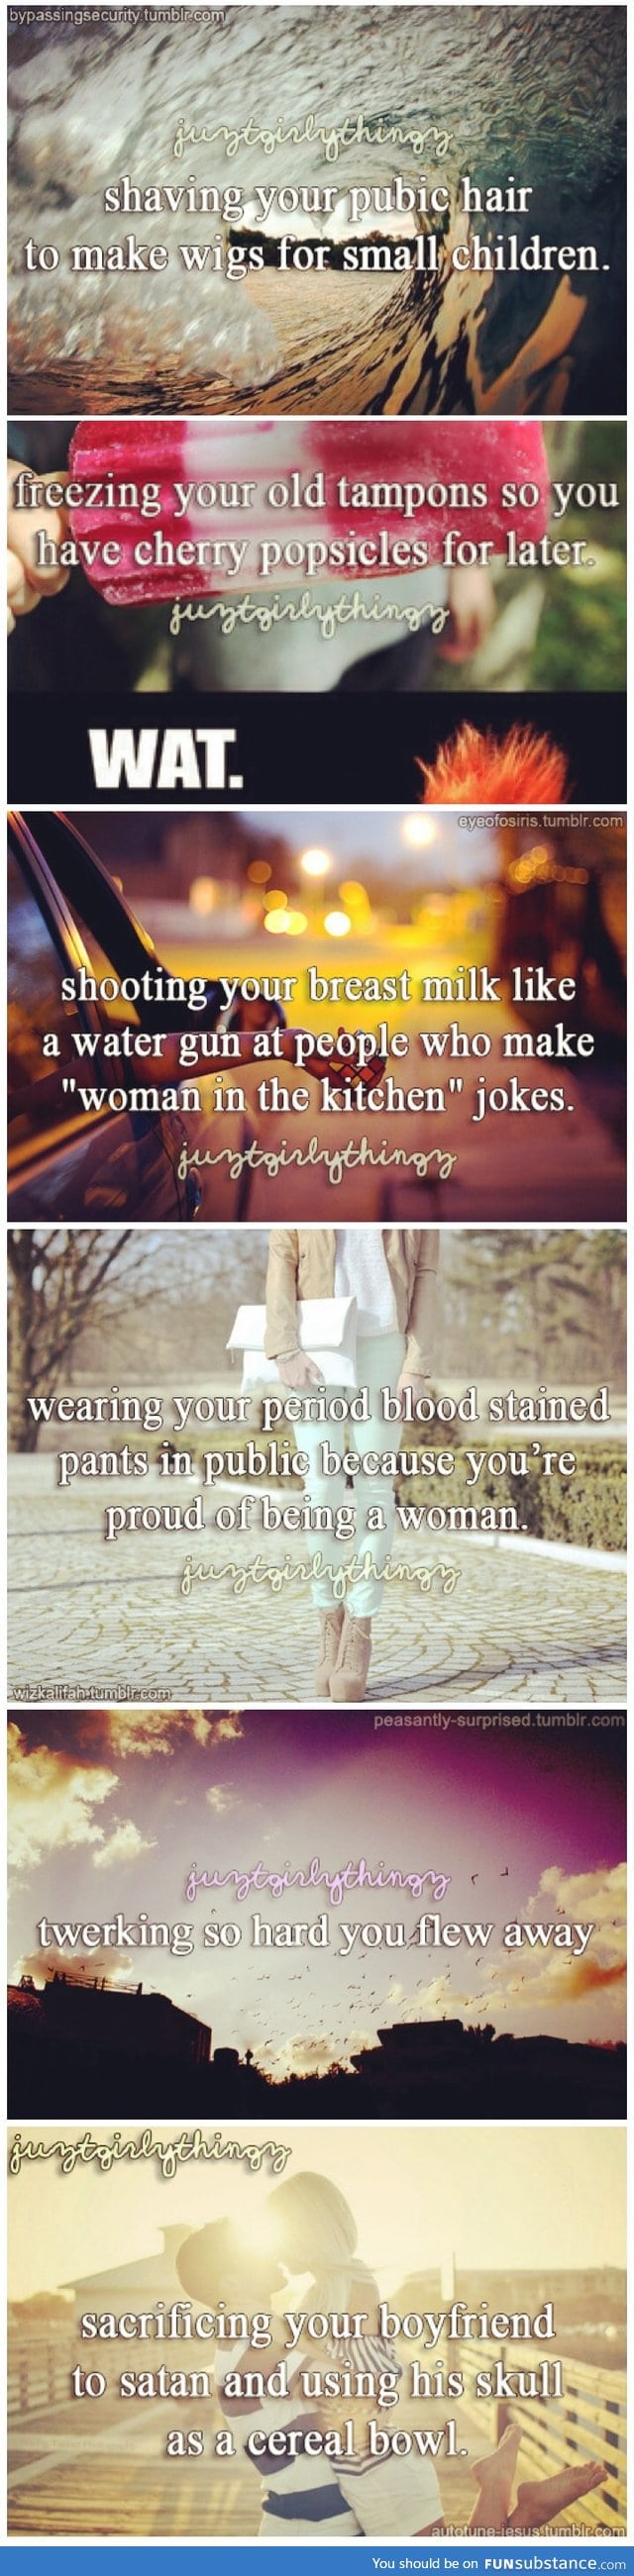 Da hell just girly things?